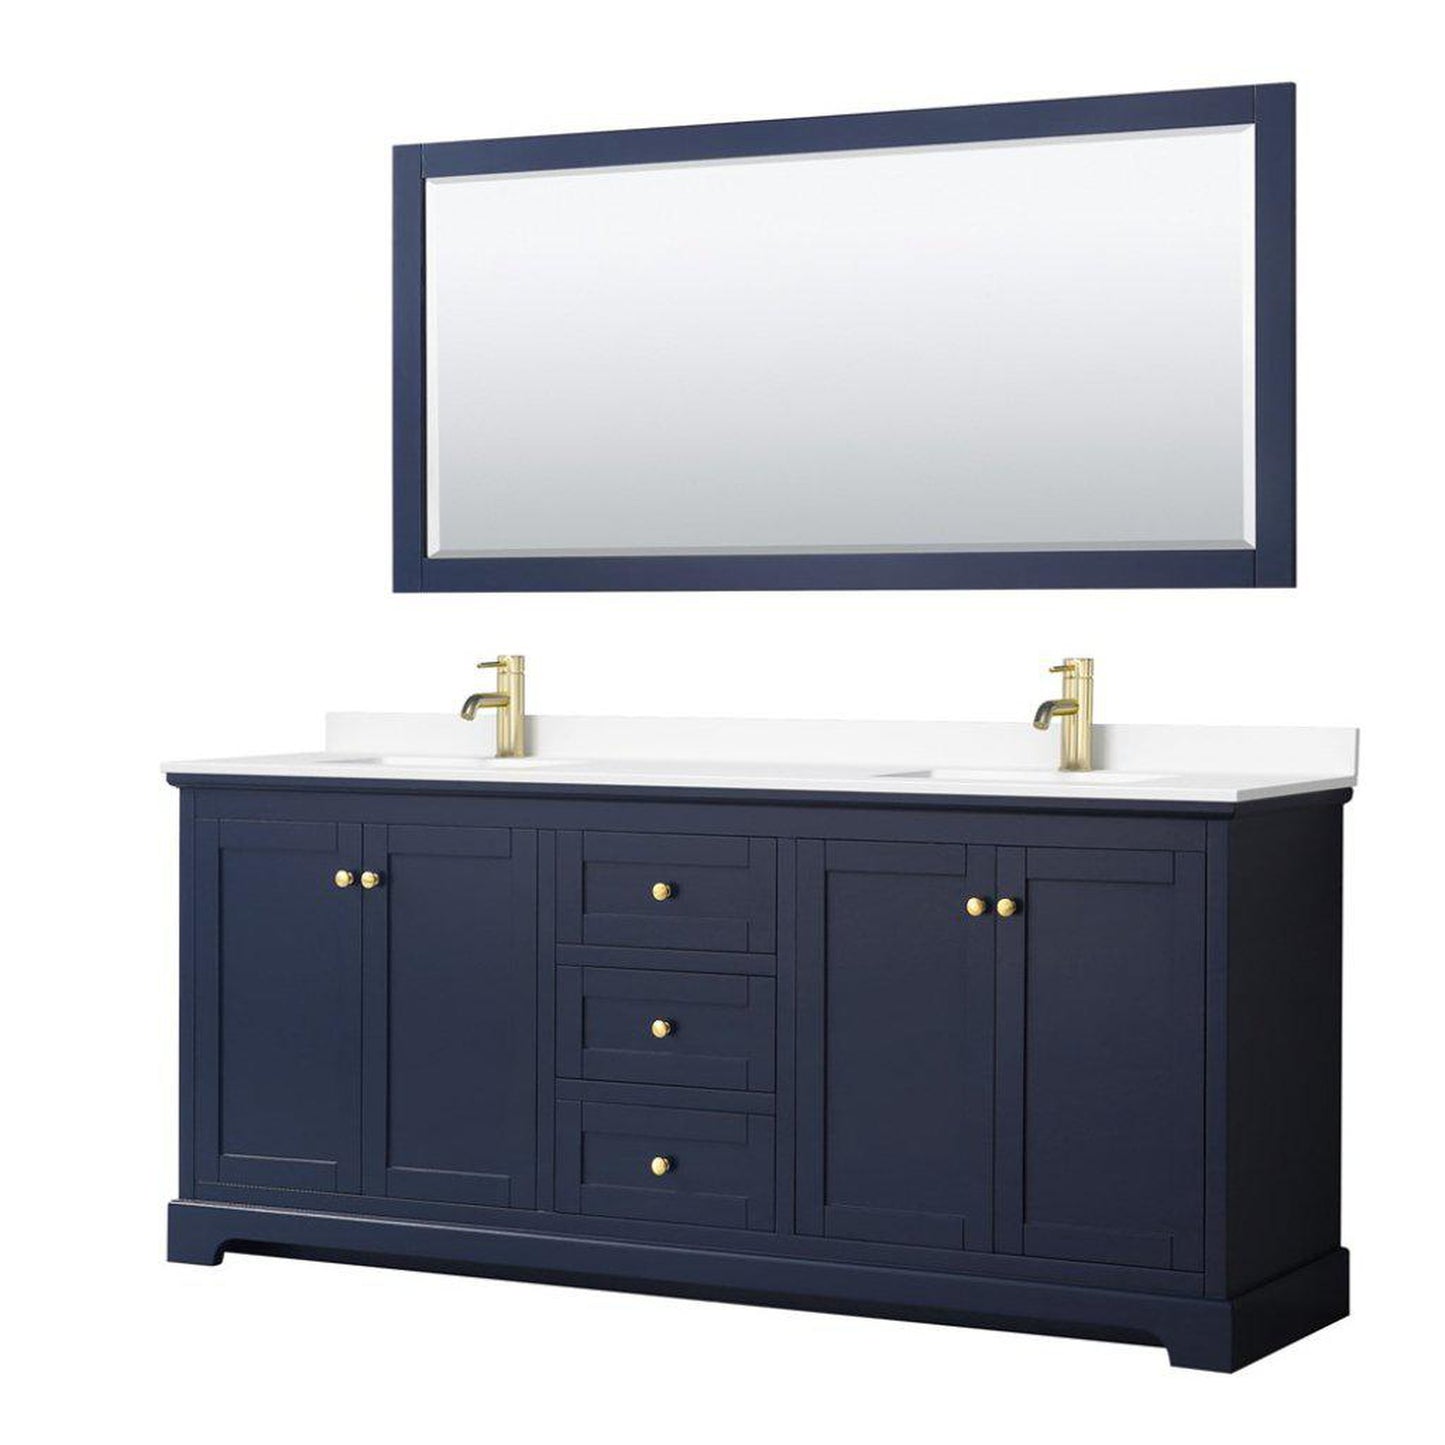 Wyndham Collection Avery 80" Dark Blue Double Bathroom Vanity Set With White Cultured Marble Countertop With 1-Hole Faucet And Square Sink And 70" Mirror